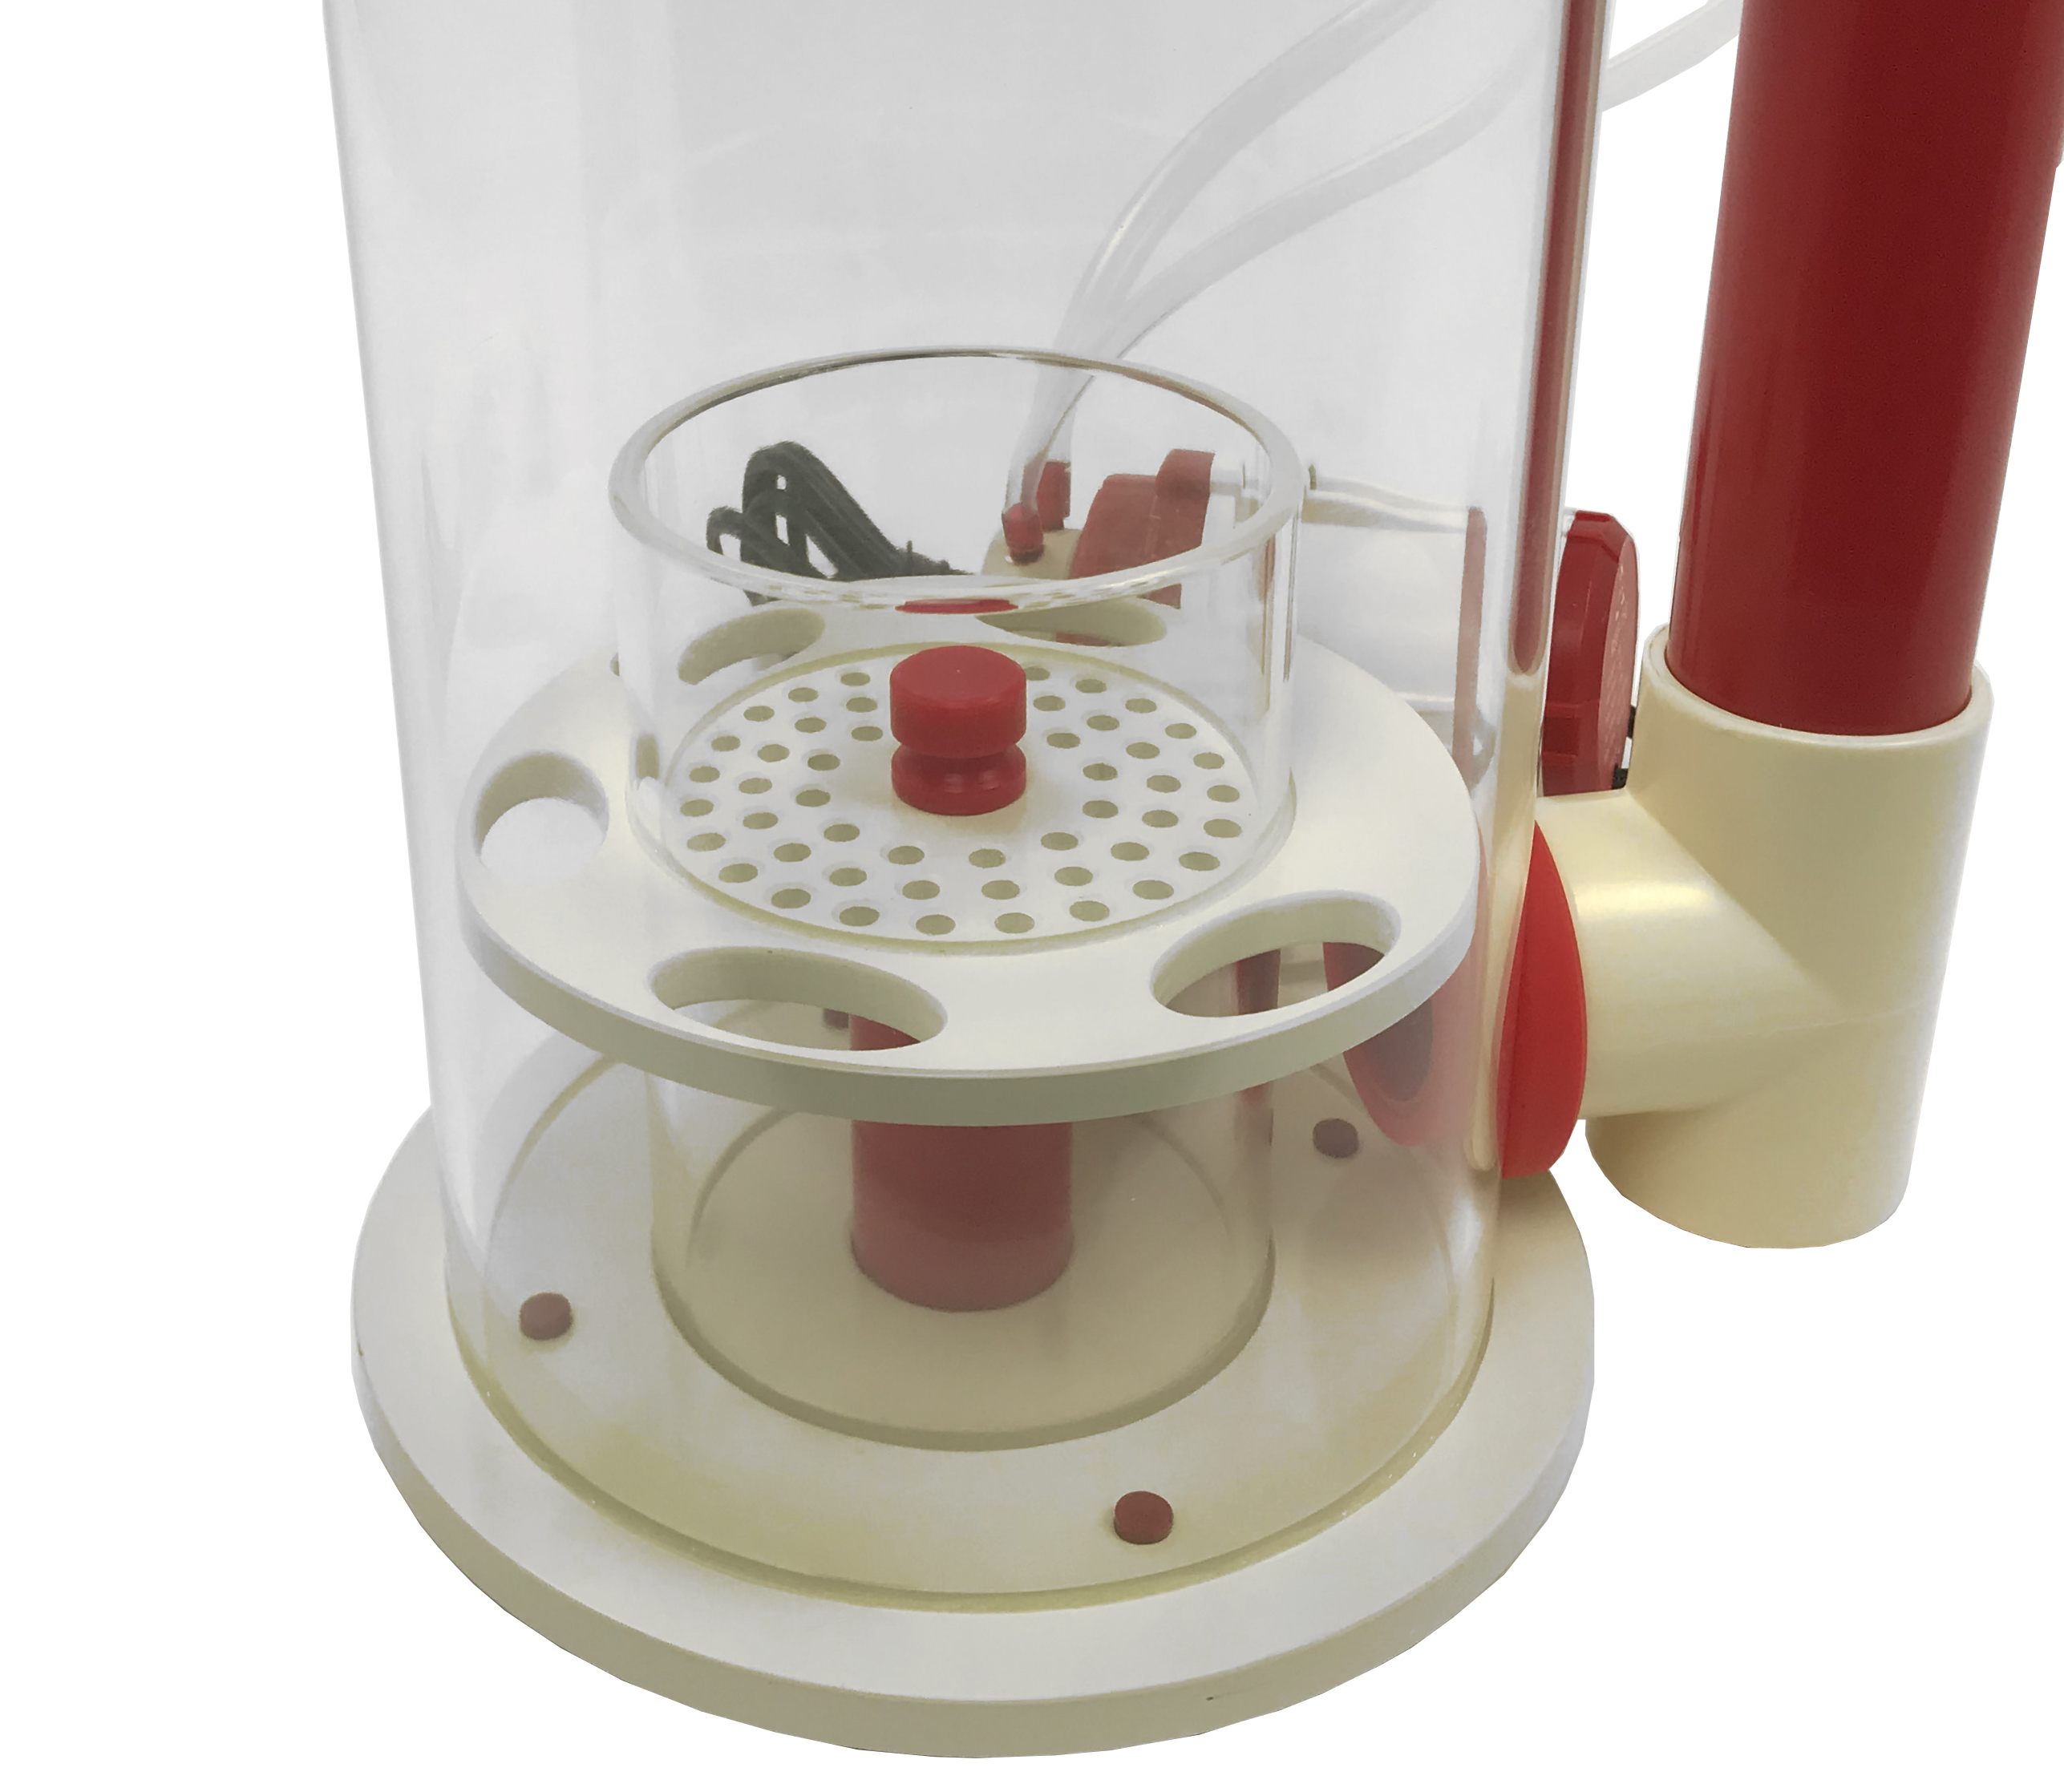 DC 200 Controllable Protein Skimmer  - 789 gph up to 200 Gallons